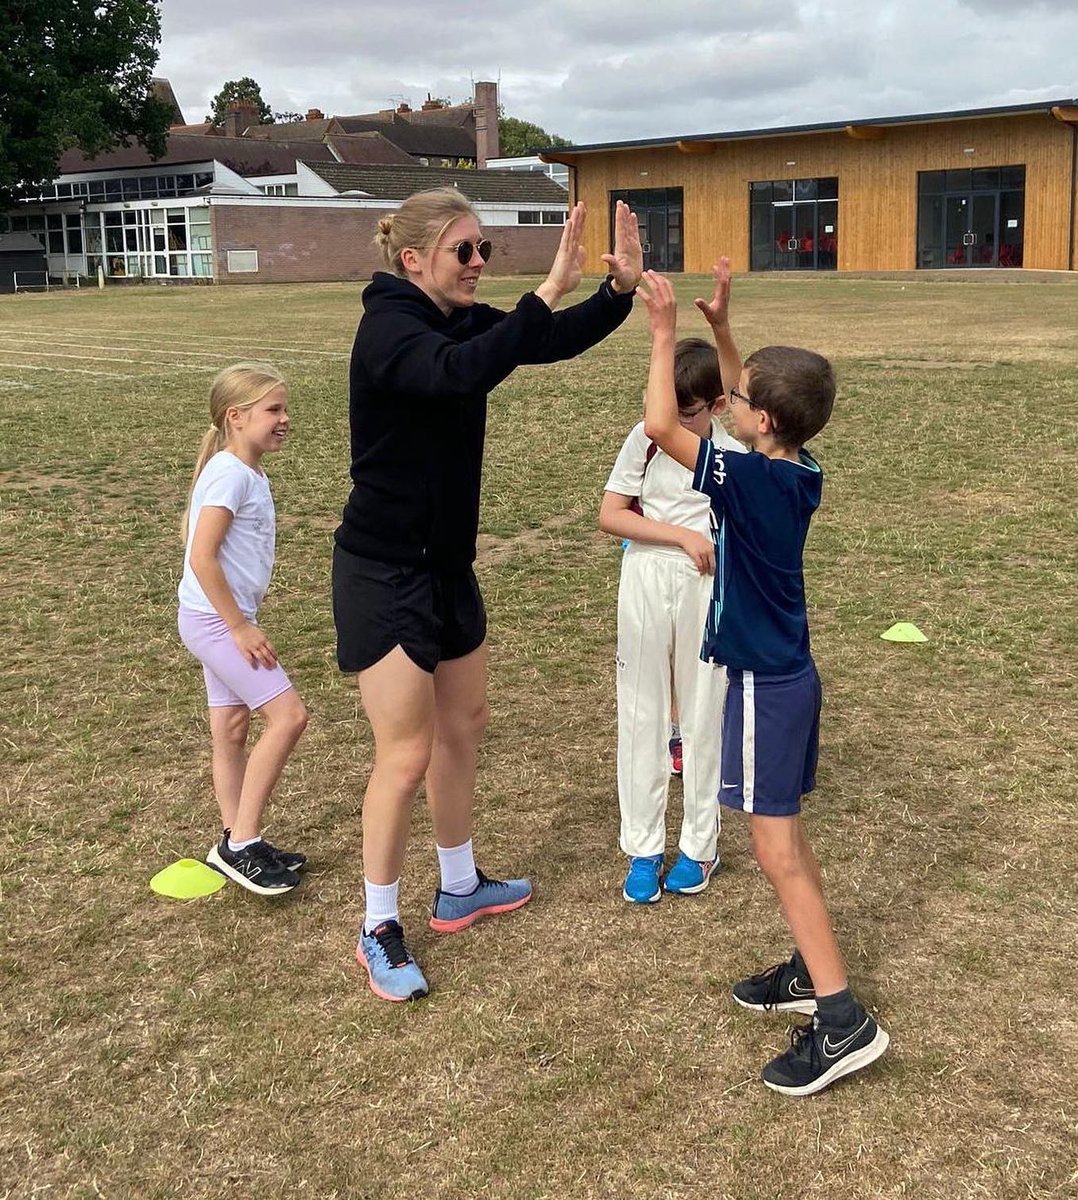 It was amazing to visit the @activatecamps at St George’s School in Hertfordshire a few weeks ago. Kids loving their cricket and wanting to learn more. I’ll be back to see more kids at @activatecamps Cricket Academies once I get this hip right! #cricketacademy #activatecamps #ad